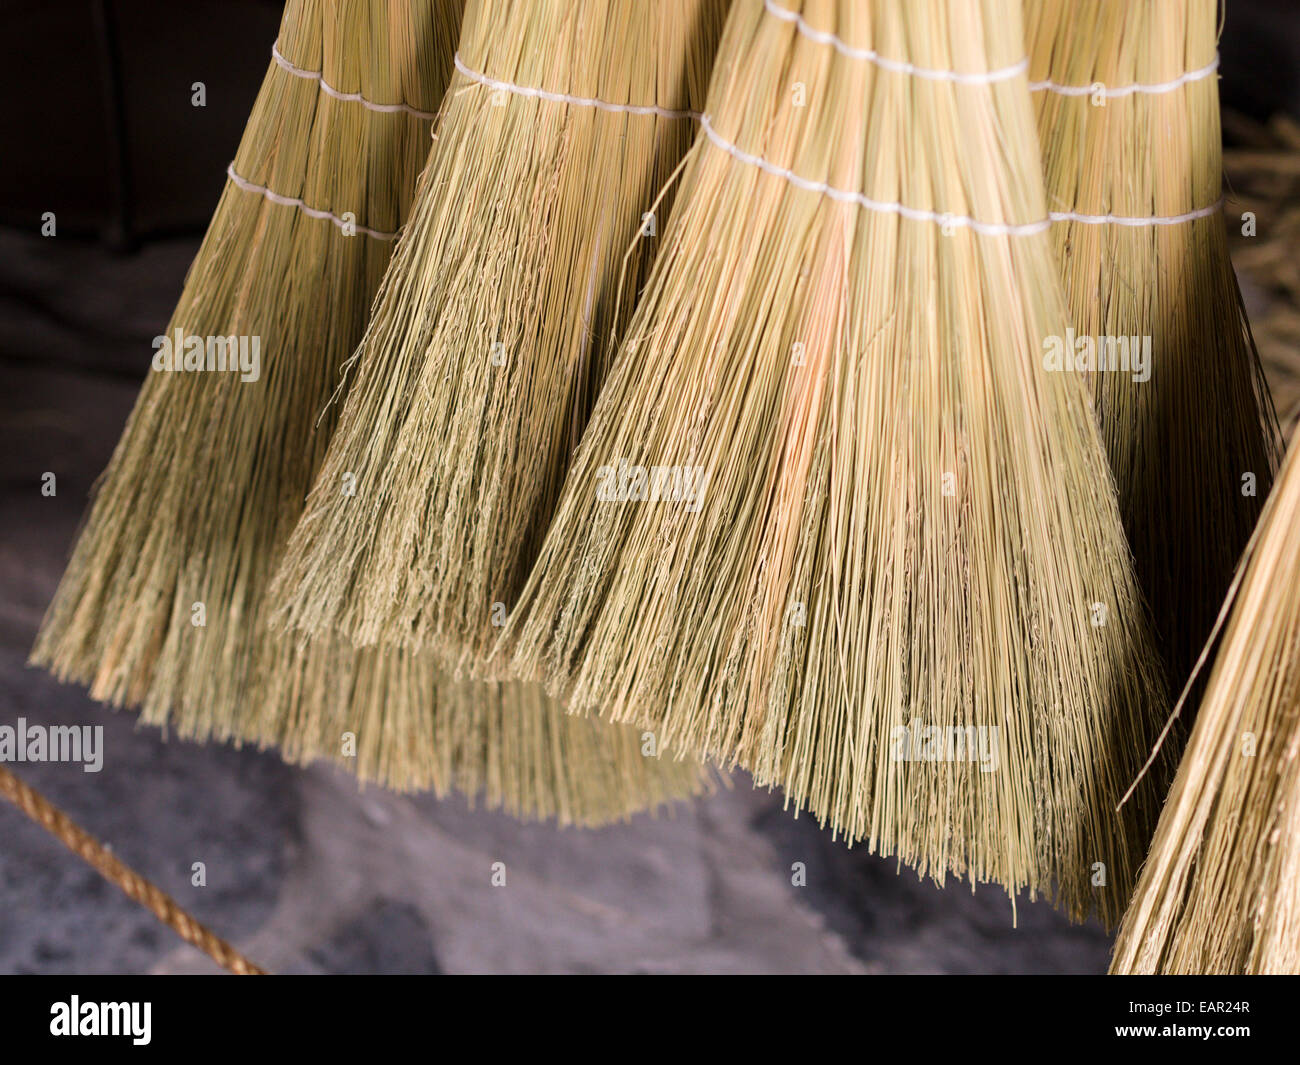 The cut ends of handmade corn brooms. Hand made brooms made in a ...